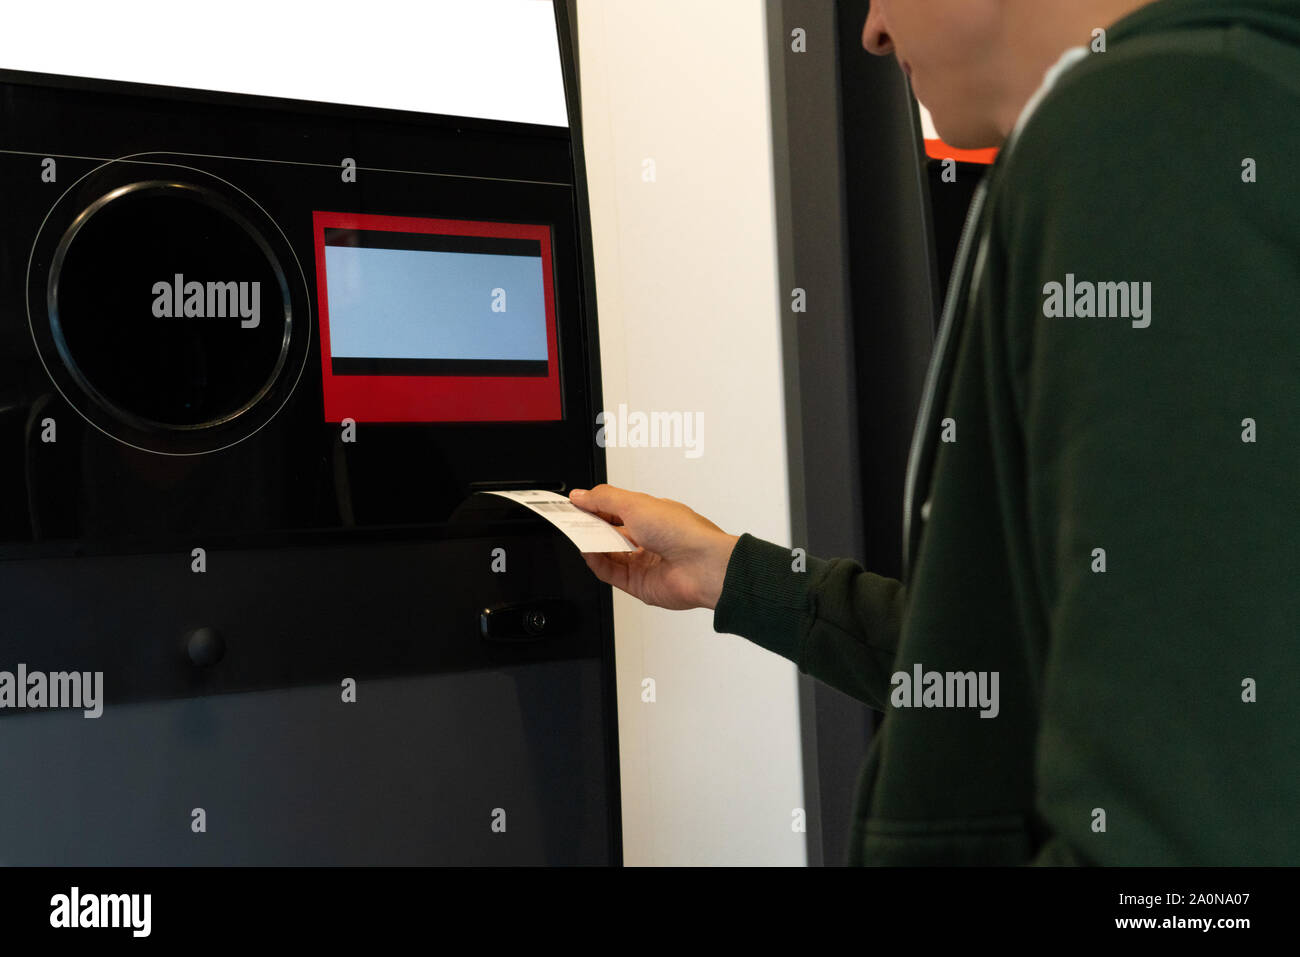 Man uses a self service machine to receive used plastic bottles and cans in a store Stock Photo